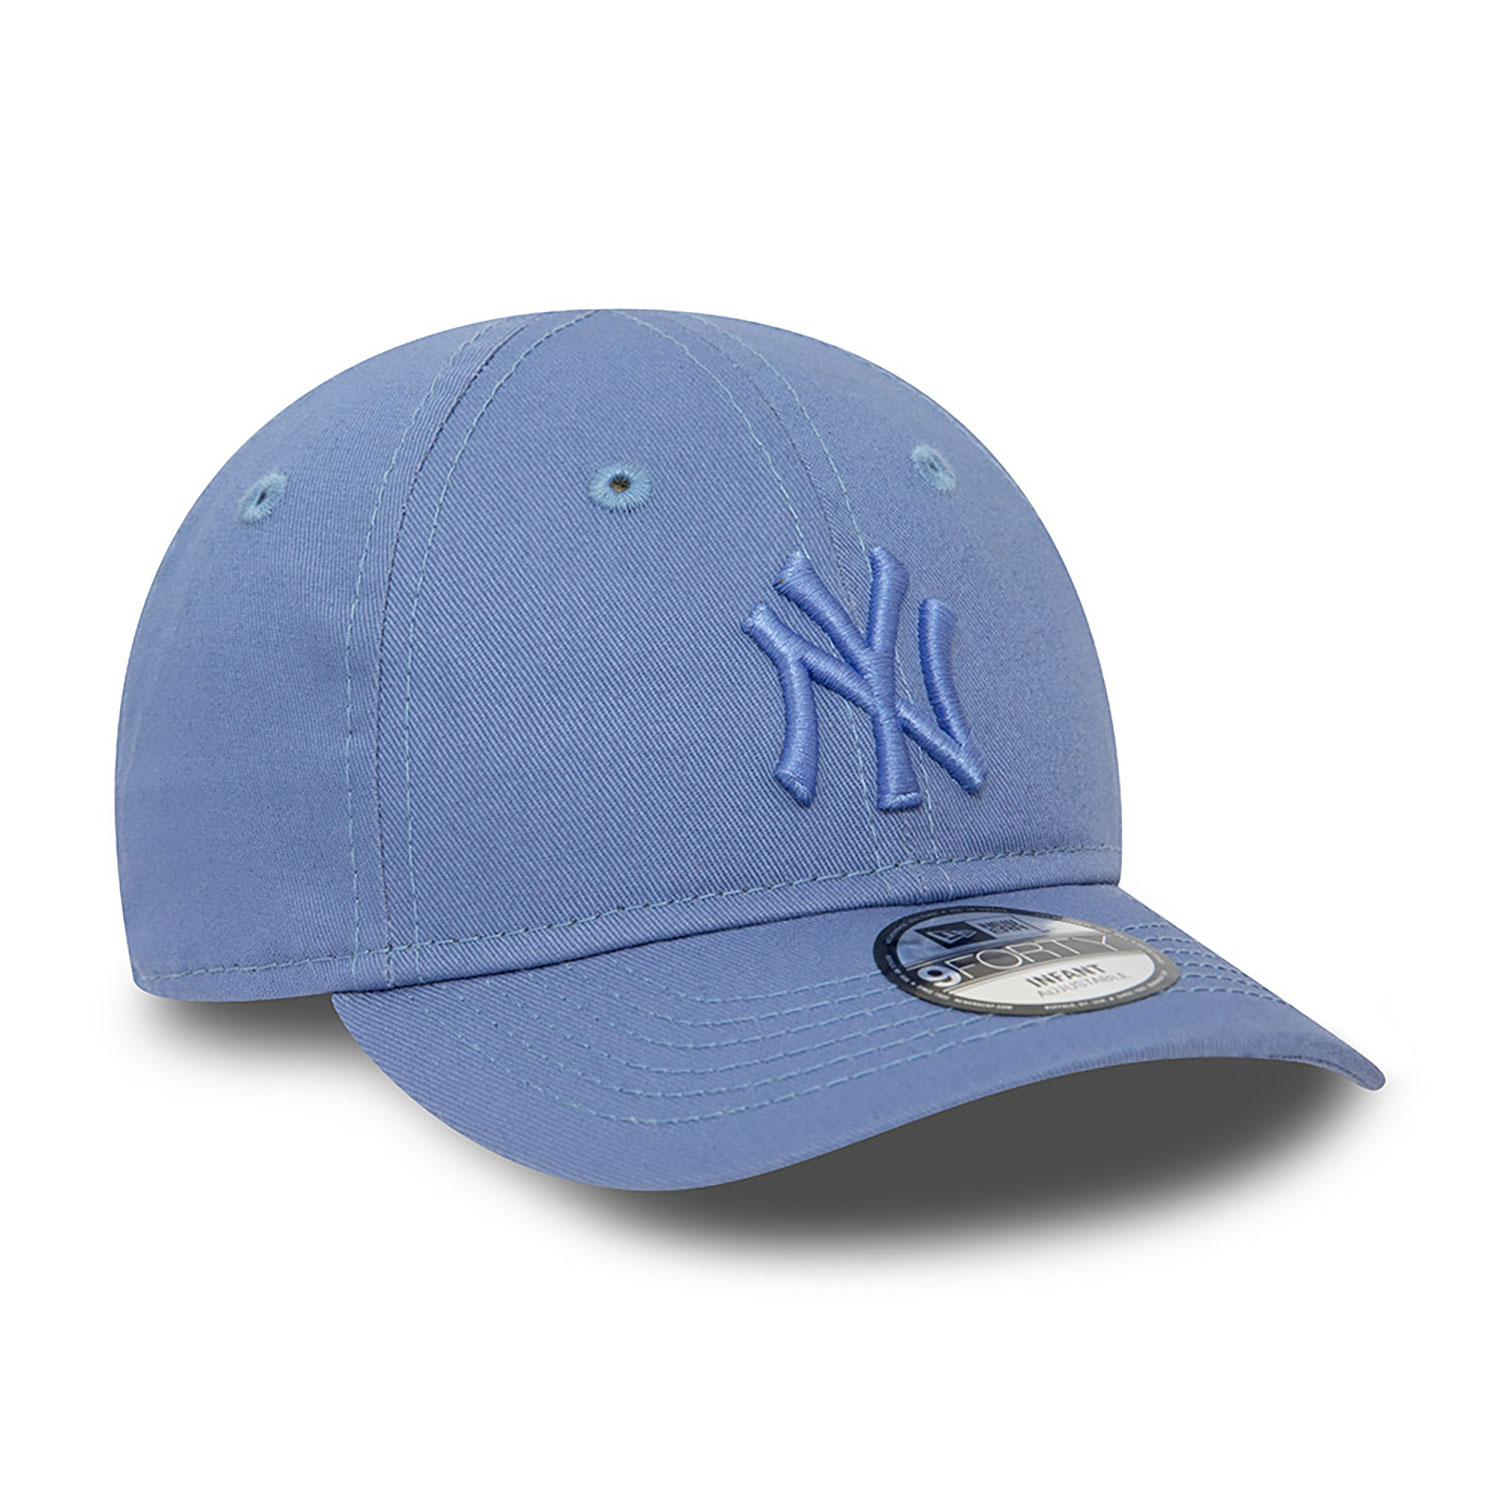 New York Yankees Infant League Essential Blue 9FORTY Adjustable Cap